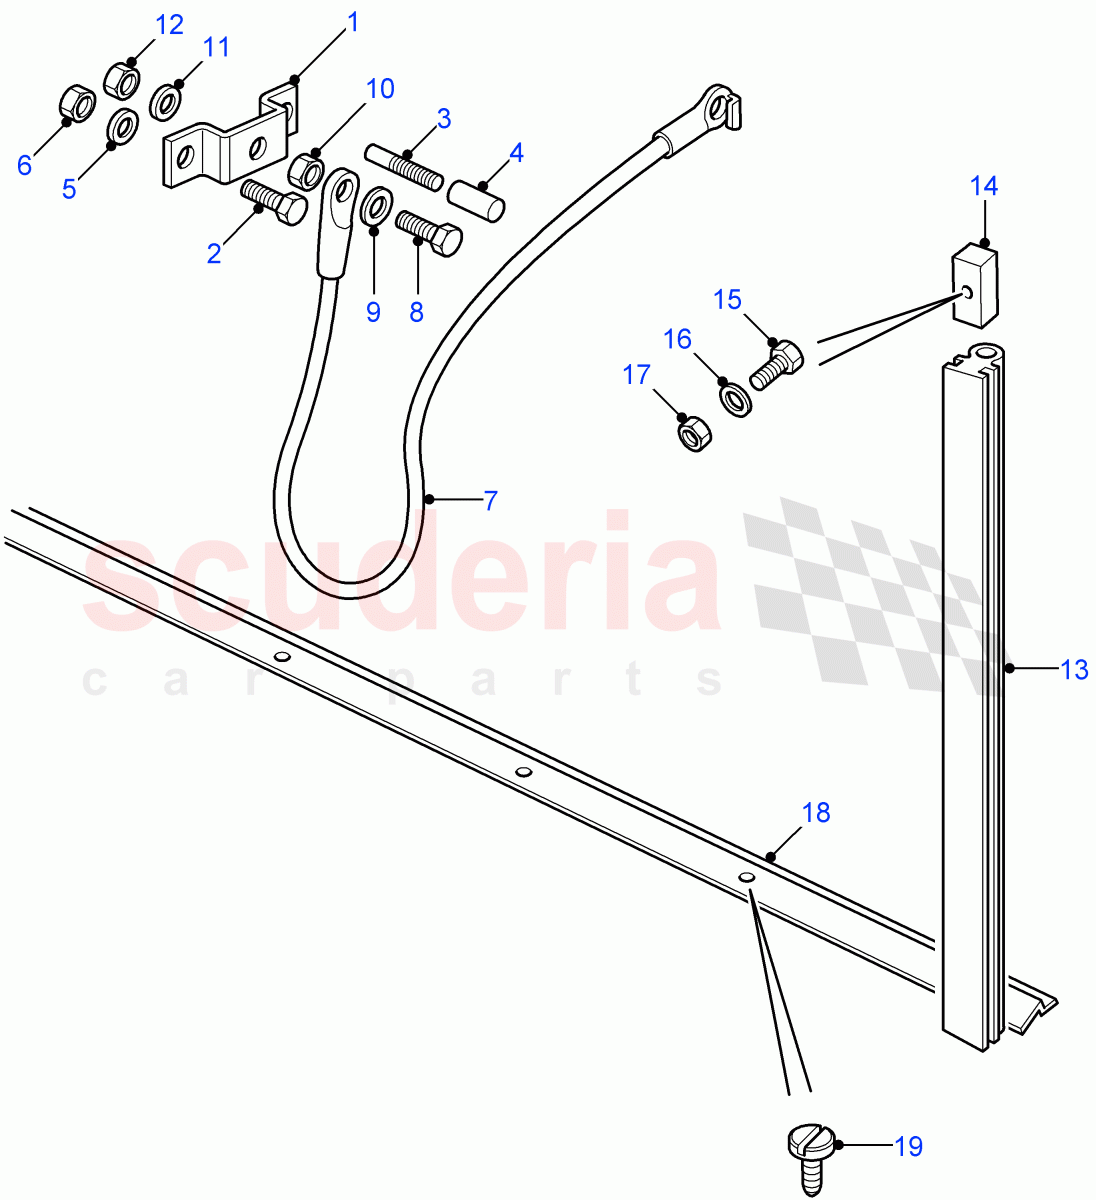 Cable-Rear Body Tailgate(With High Capacity Tailgate,With Lower Tailgate)((V)FROM7A000001) of Land Rover Land Rover Defender (2007-2016)